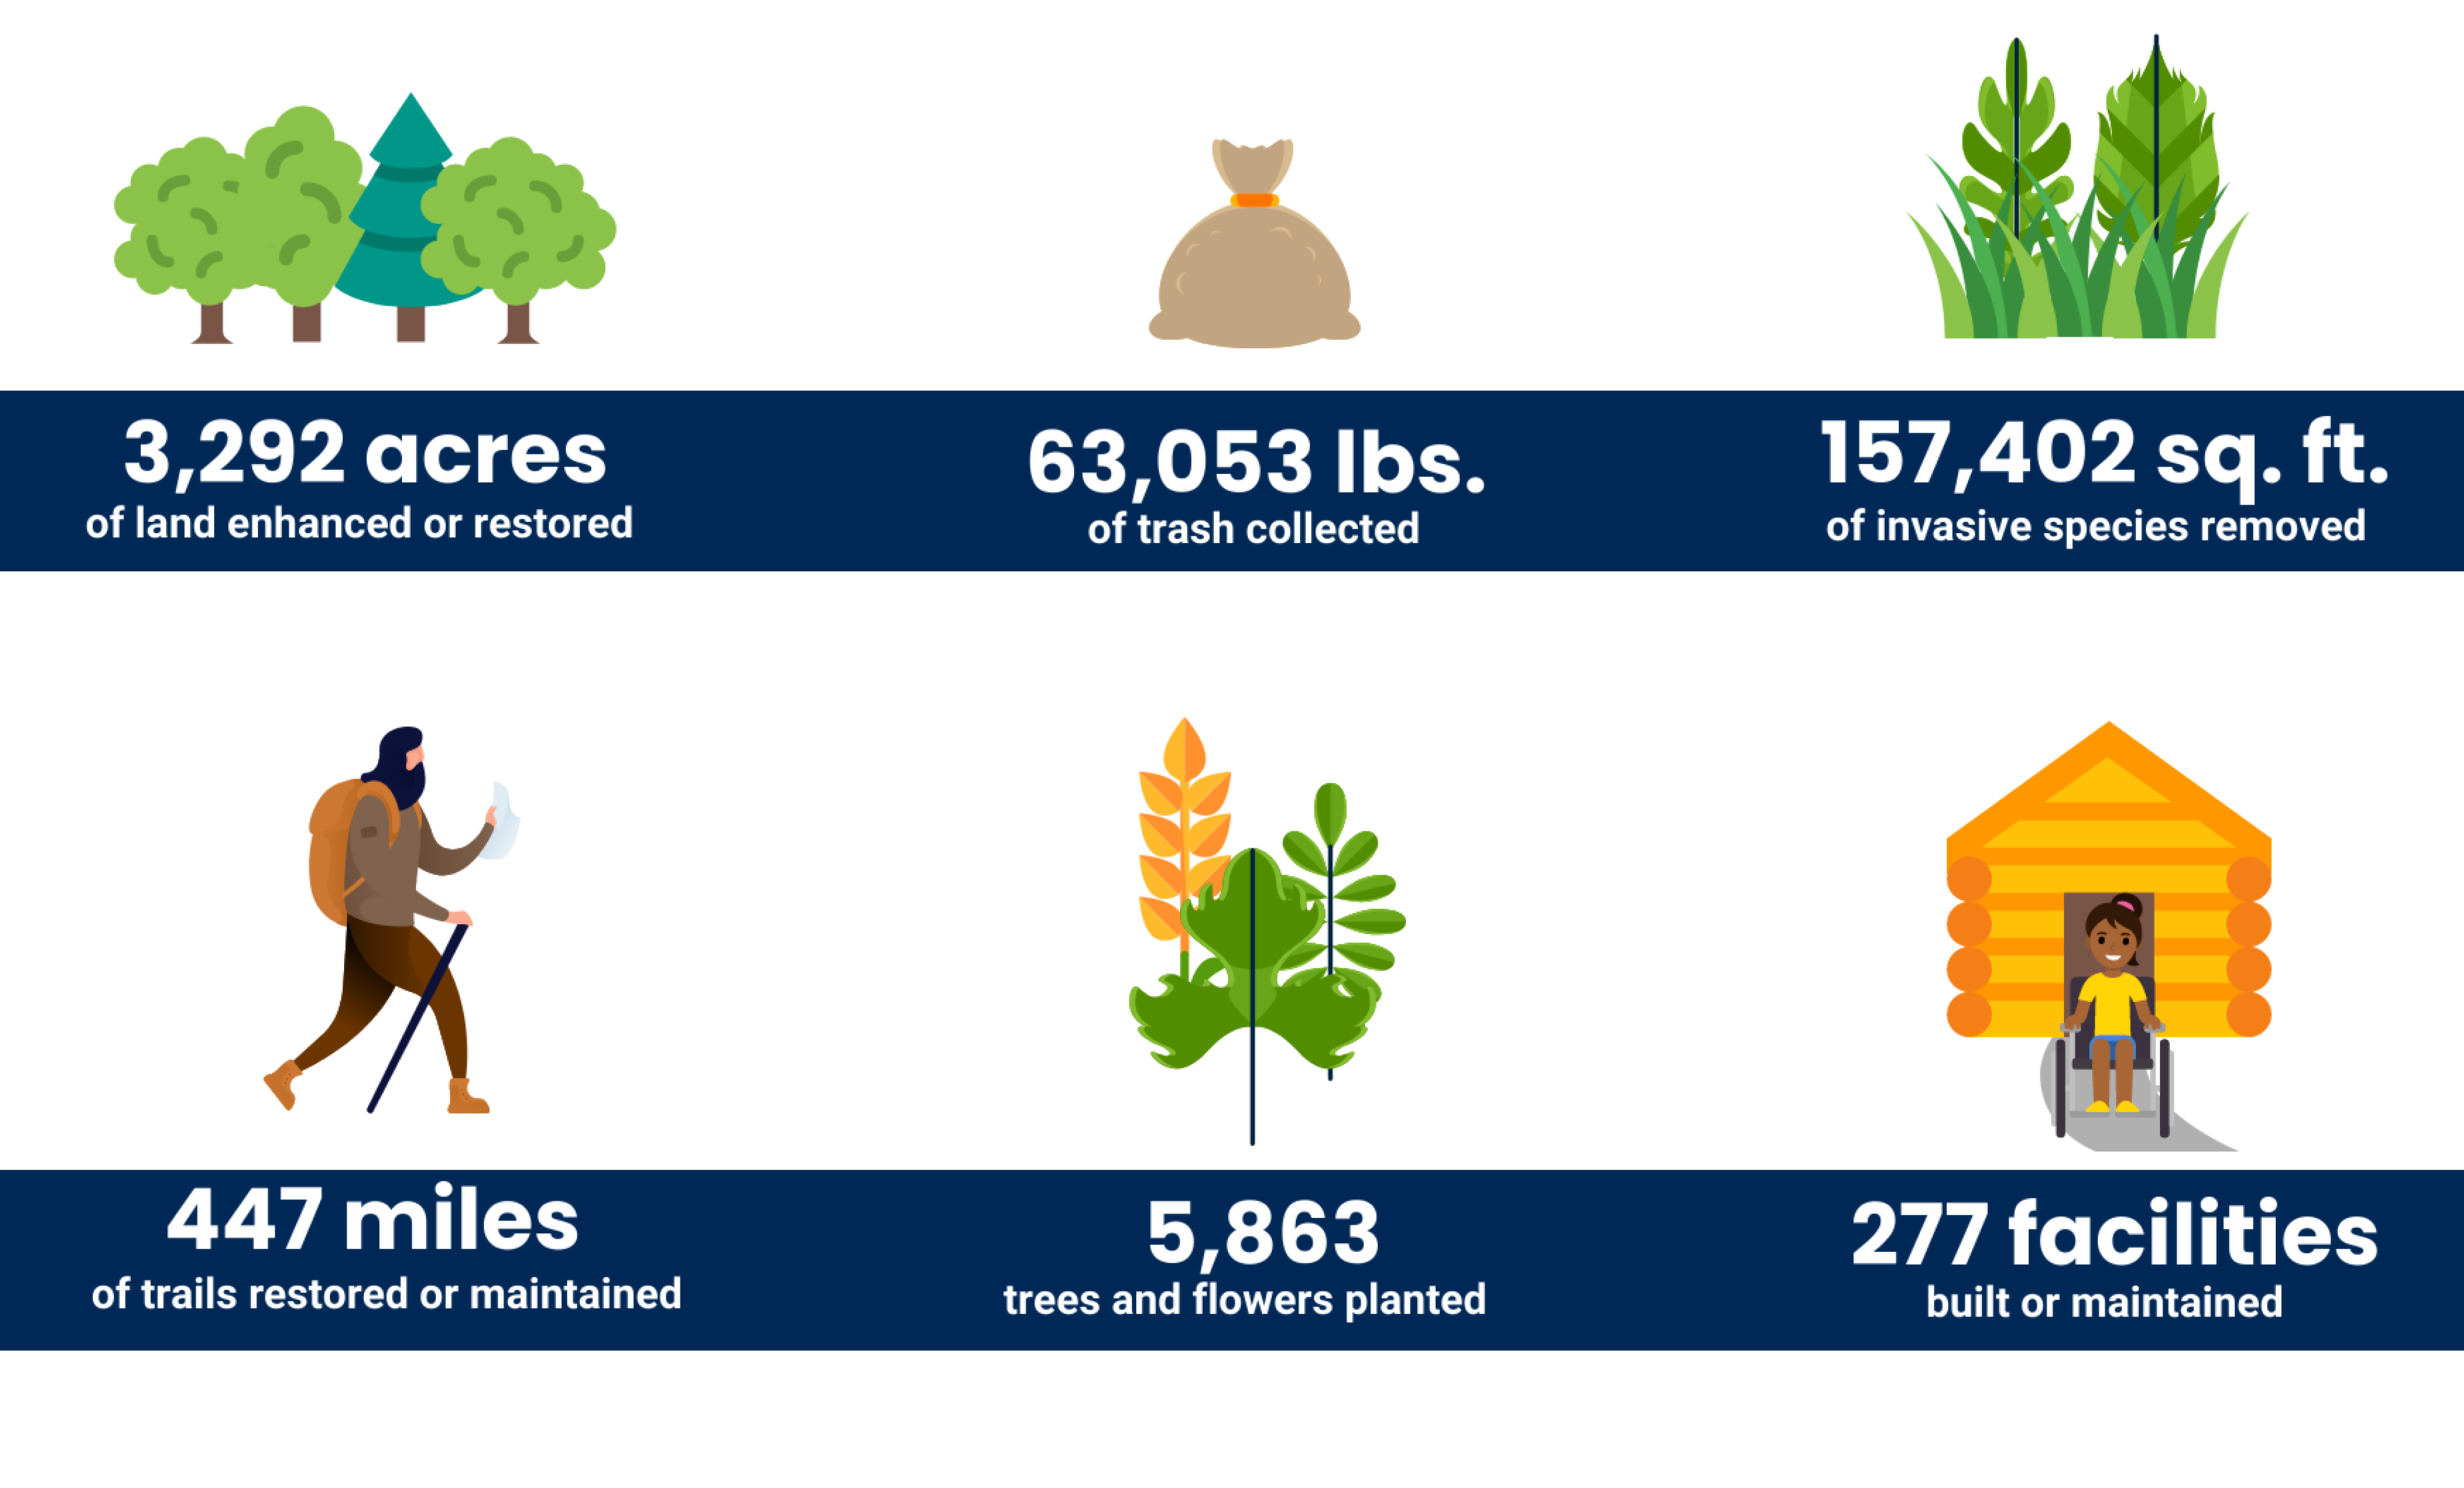 NPLD 2021 Conservation Impacts. tree icon 3,292 acres of public lands restored; trash bag icon 63,053 pounds of trash collected; green foliage icon 157,402 square feet of invasive plants removed; hiker icon 447 miles of trails and rivers maintained; flowers icon 5,863 trees and flowers planted; person in wheel chair on path from cabin icon 277 public facilities built or maintained